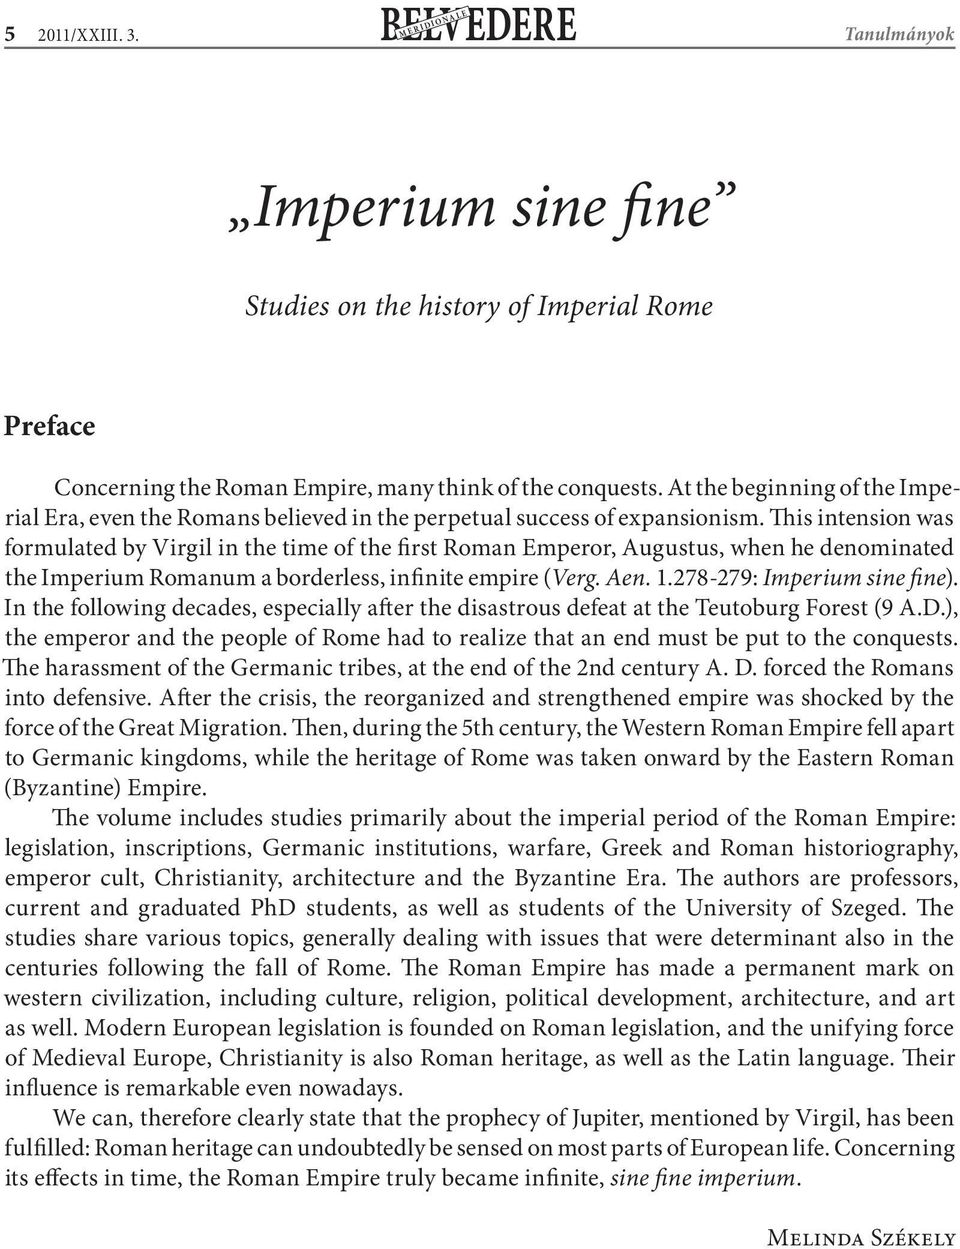 This intension was formulated by Virgil in the time of the first Roman Emperor, Augustus, when he denominated the Imperium Romanum a borderless, infinite empire (Verg. Aen. 1.